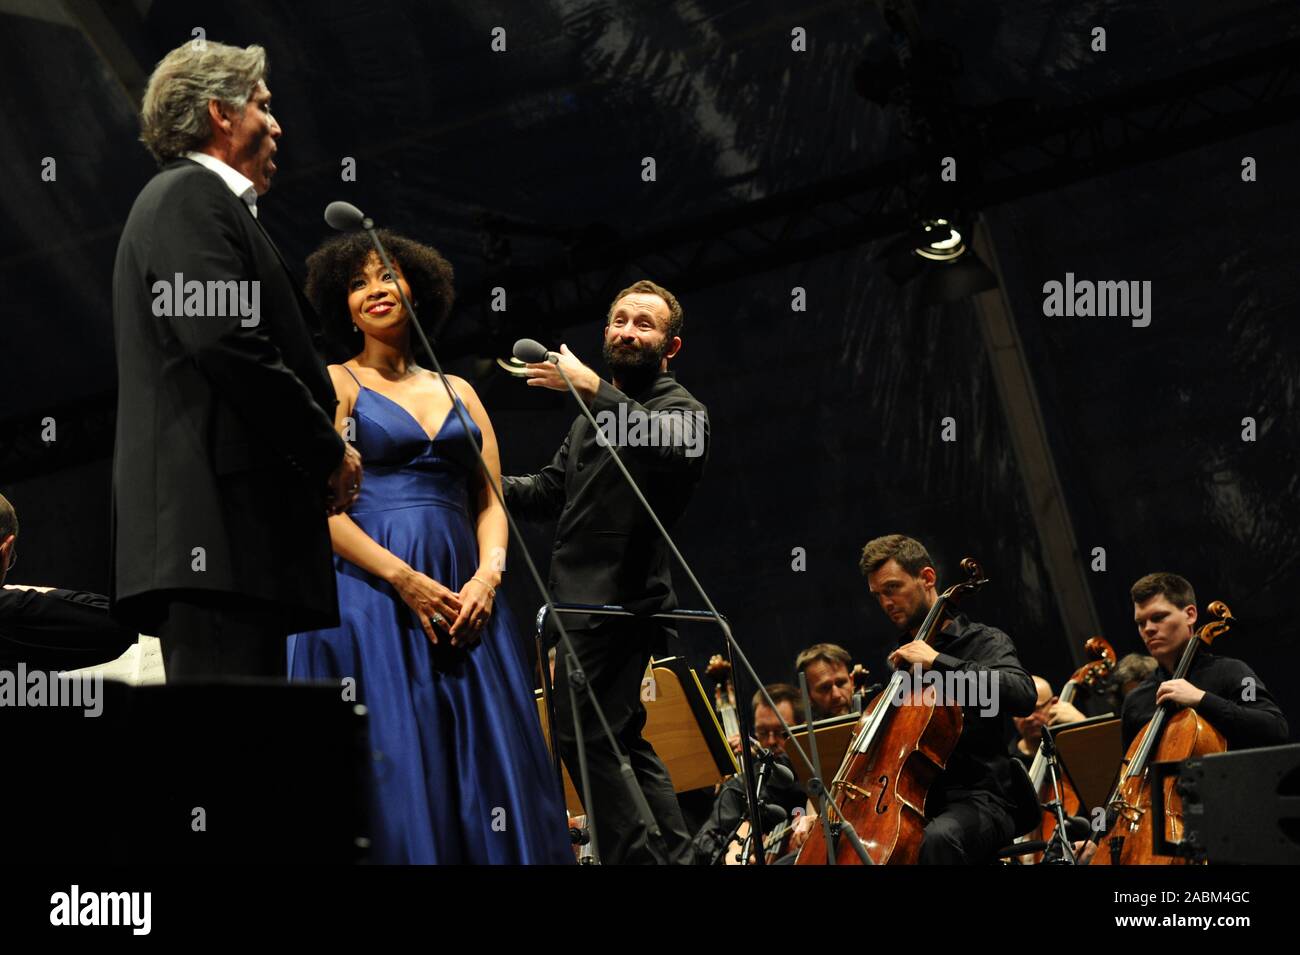 'Opera for All' at Munich's Marstallplatz: more than 10,000 visitors listen to the festival concert with the Bavarian State Orchestra conducted by Music Director Kiril Petrenko (r.) and the two soloists Golda Schulz (m.) and Thomas Hampson (l.). Works from various Broadway musicals will be performed. [automated translation] Stock Photo